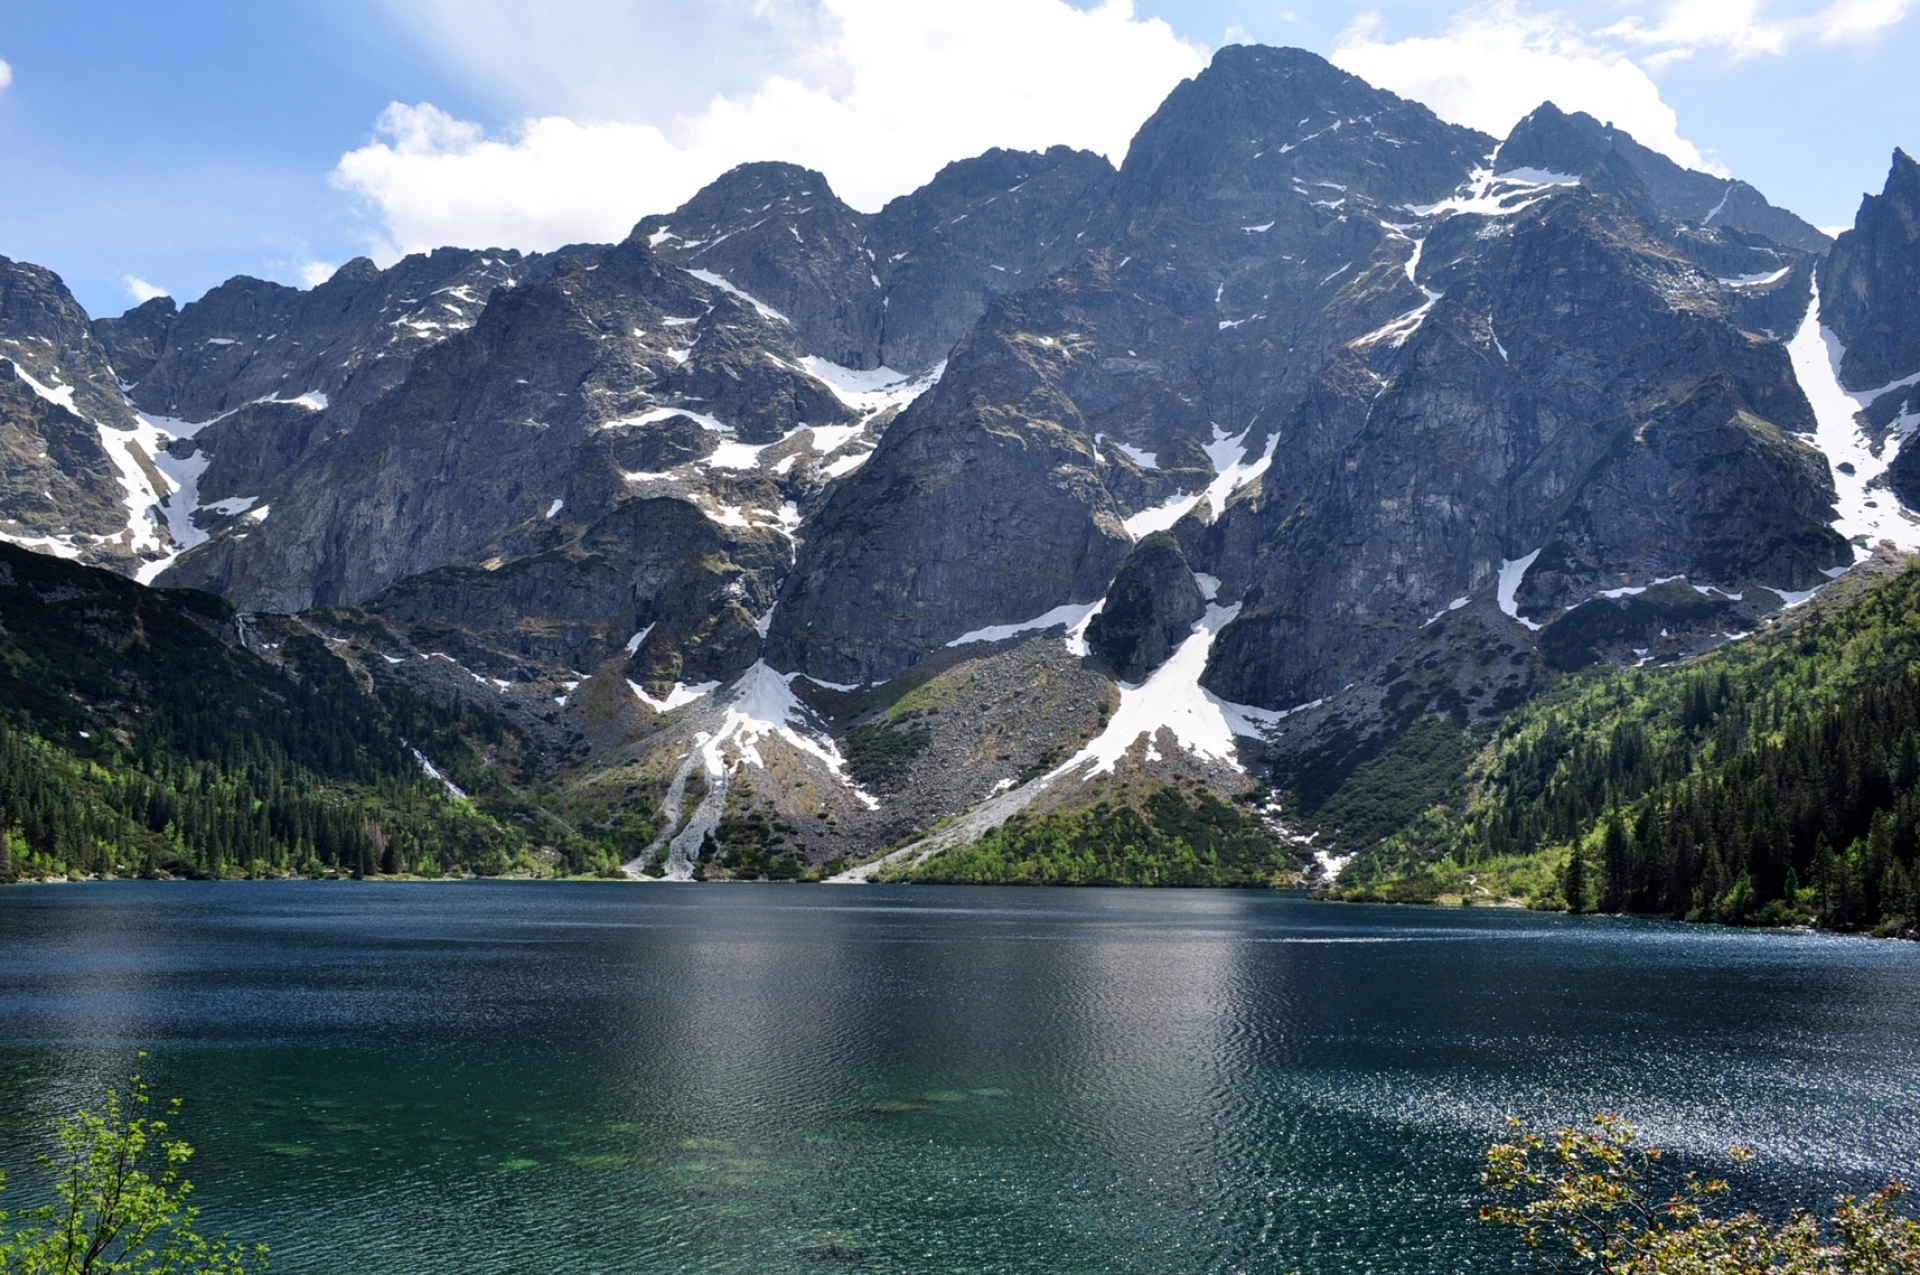 Morskie Oko from the hostel side